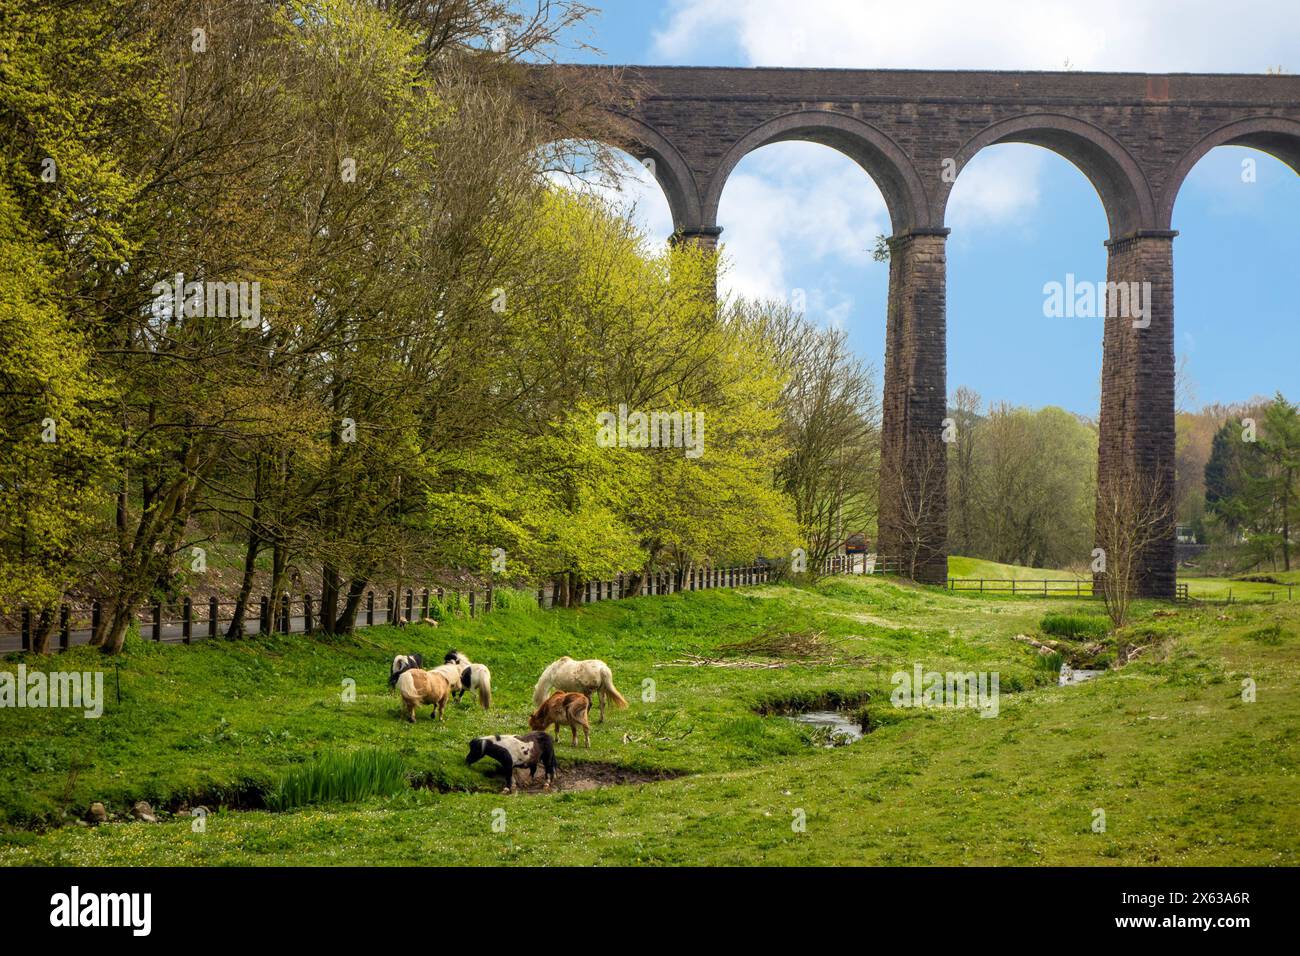 Ponies grazing on farmland meadows delow Dukes Drive Viaduct in the Derbyshire Peak district town of Buxton Stock Photo